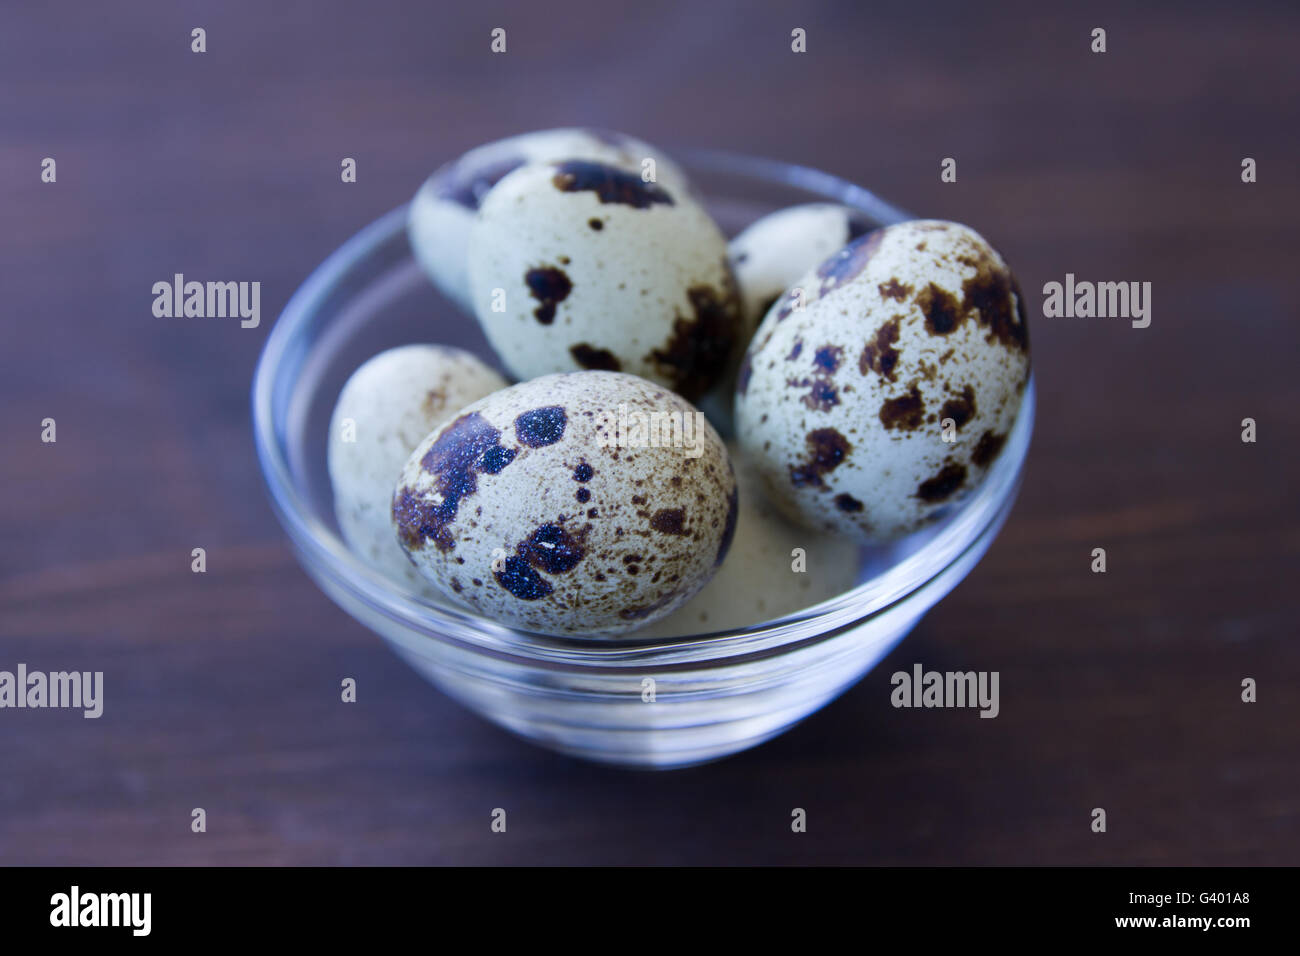 Bowl with quail eggs on a wooden table Stock Photo